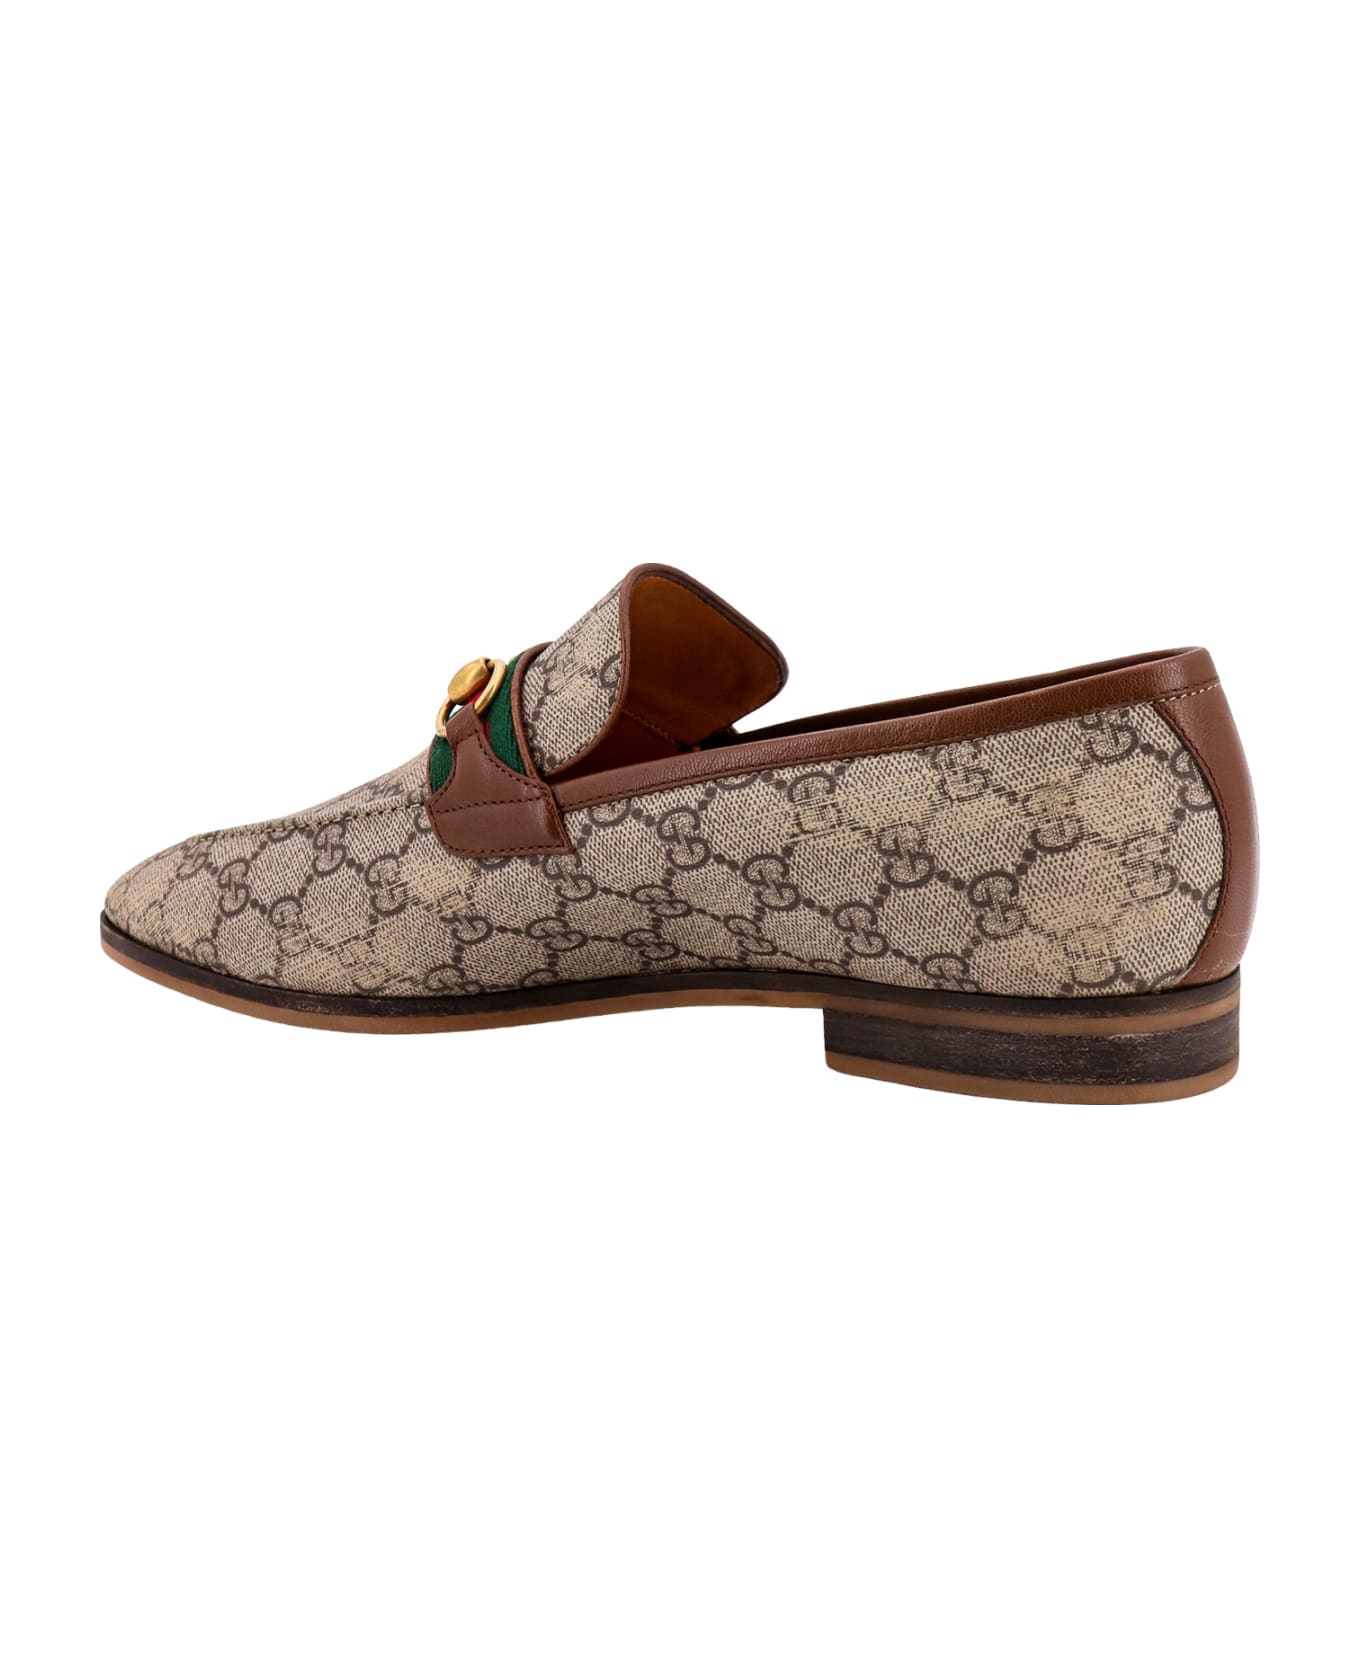 Gucci Leather Monogram Loafers - Beige